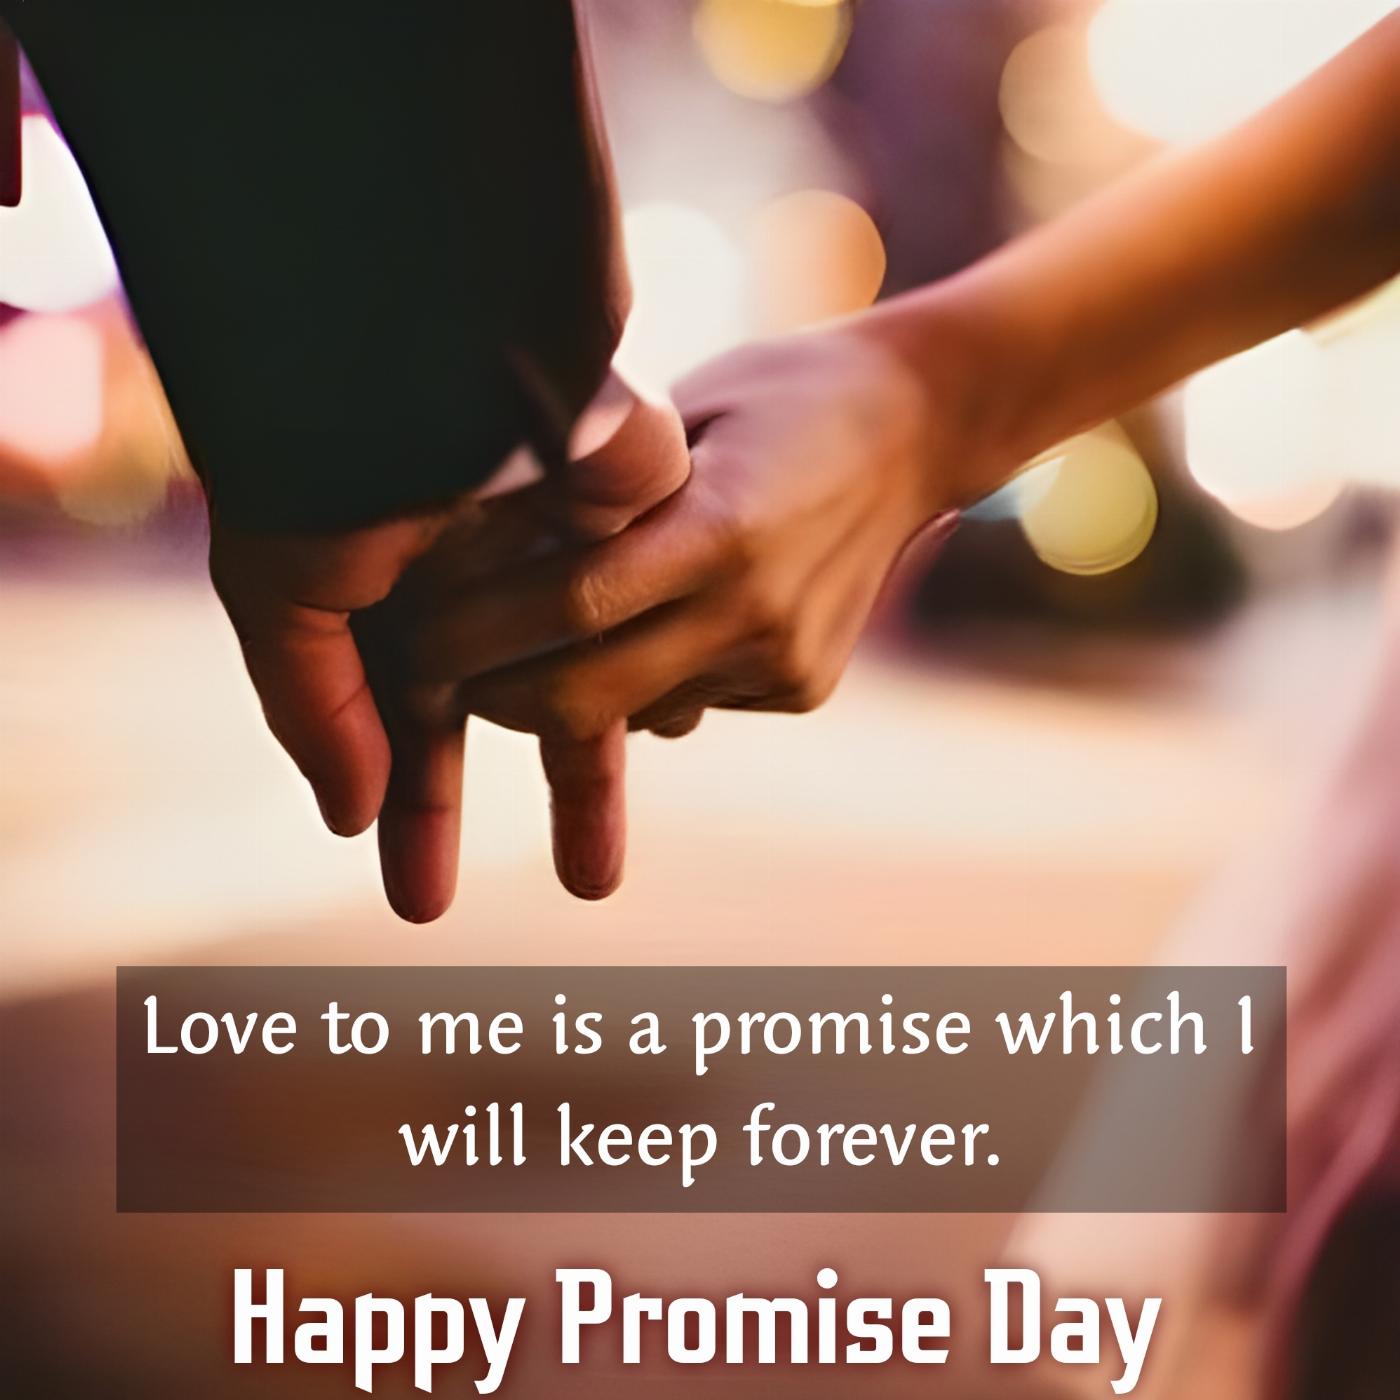 Love to me is a promise which I will keep forever